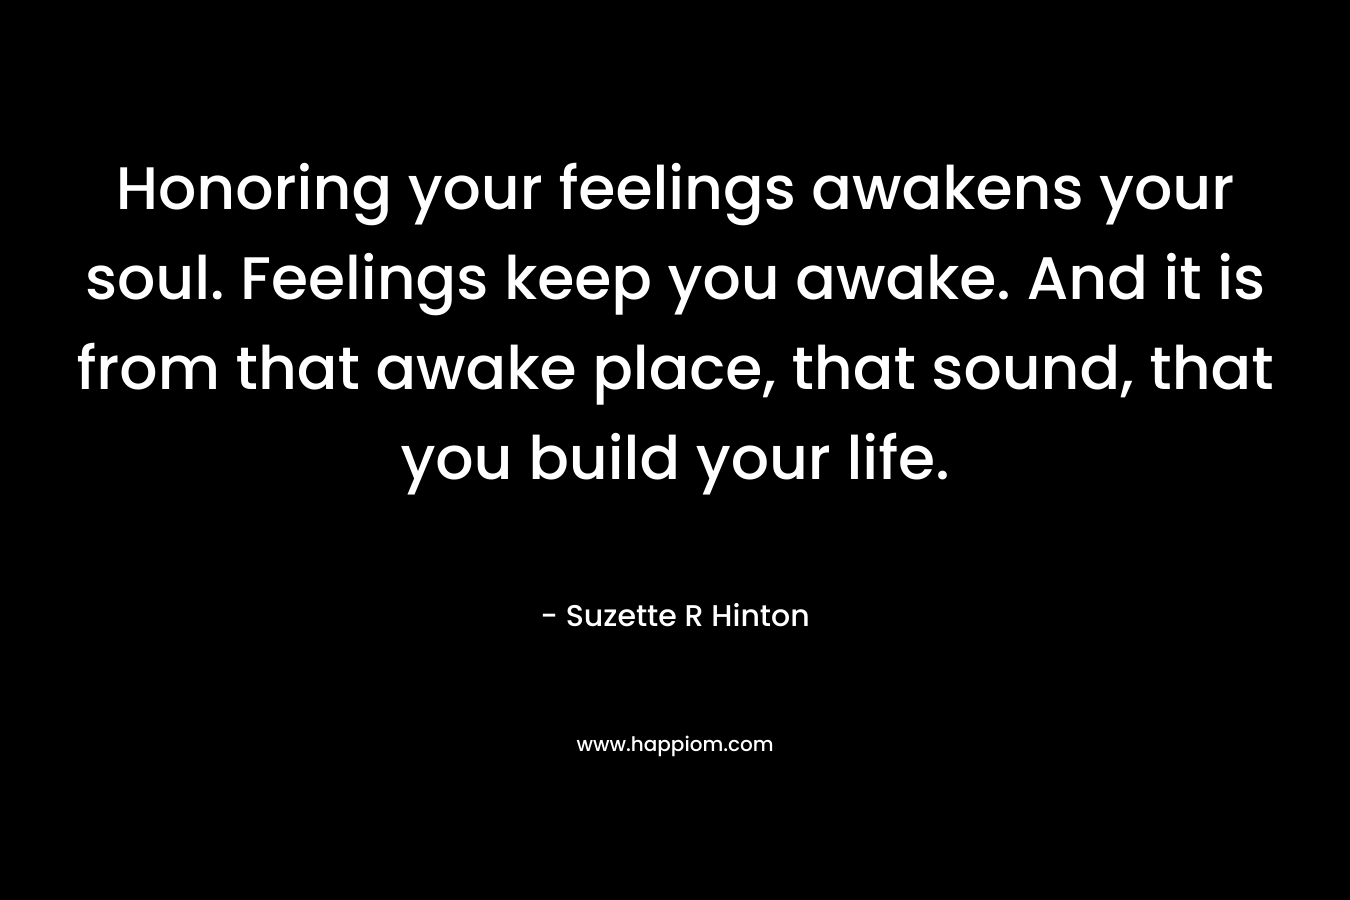 Honoring your feelings awakens your soul. Feelings keep you awake. And it is from that awake place, that sound, that you build your life.